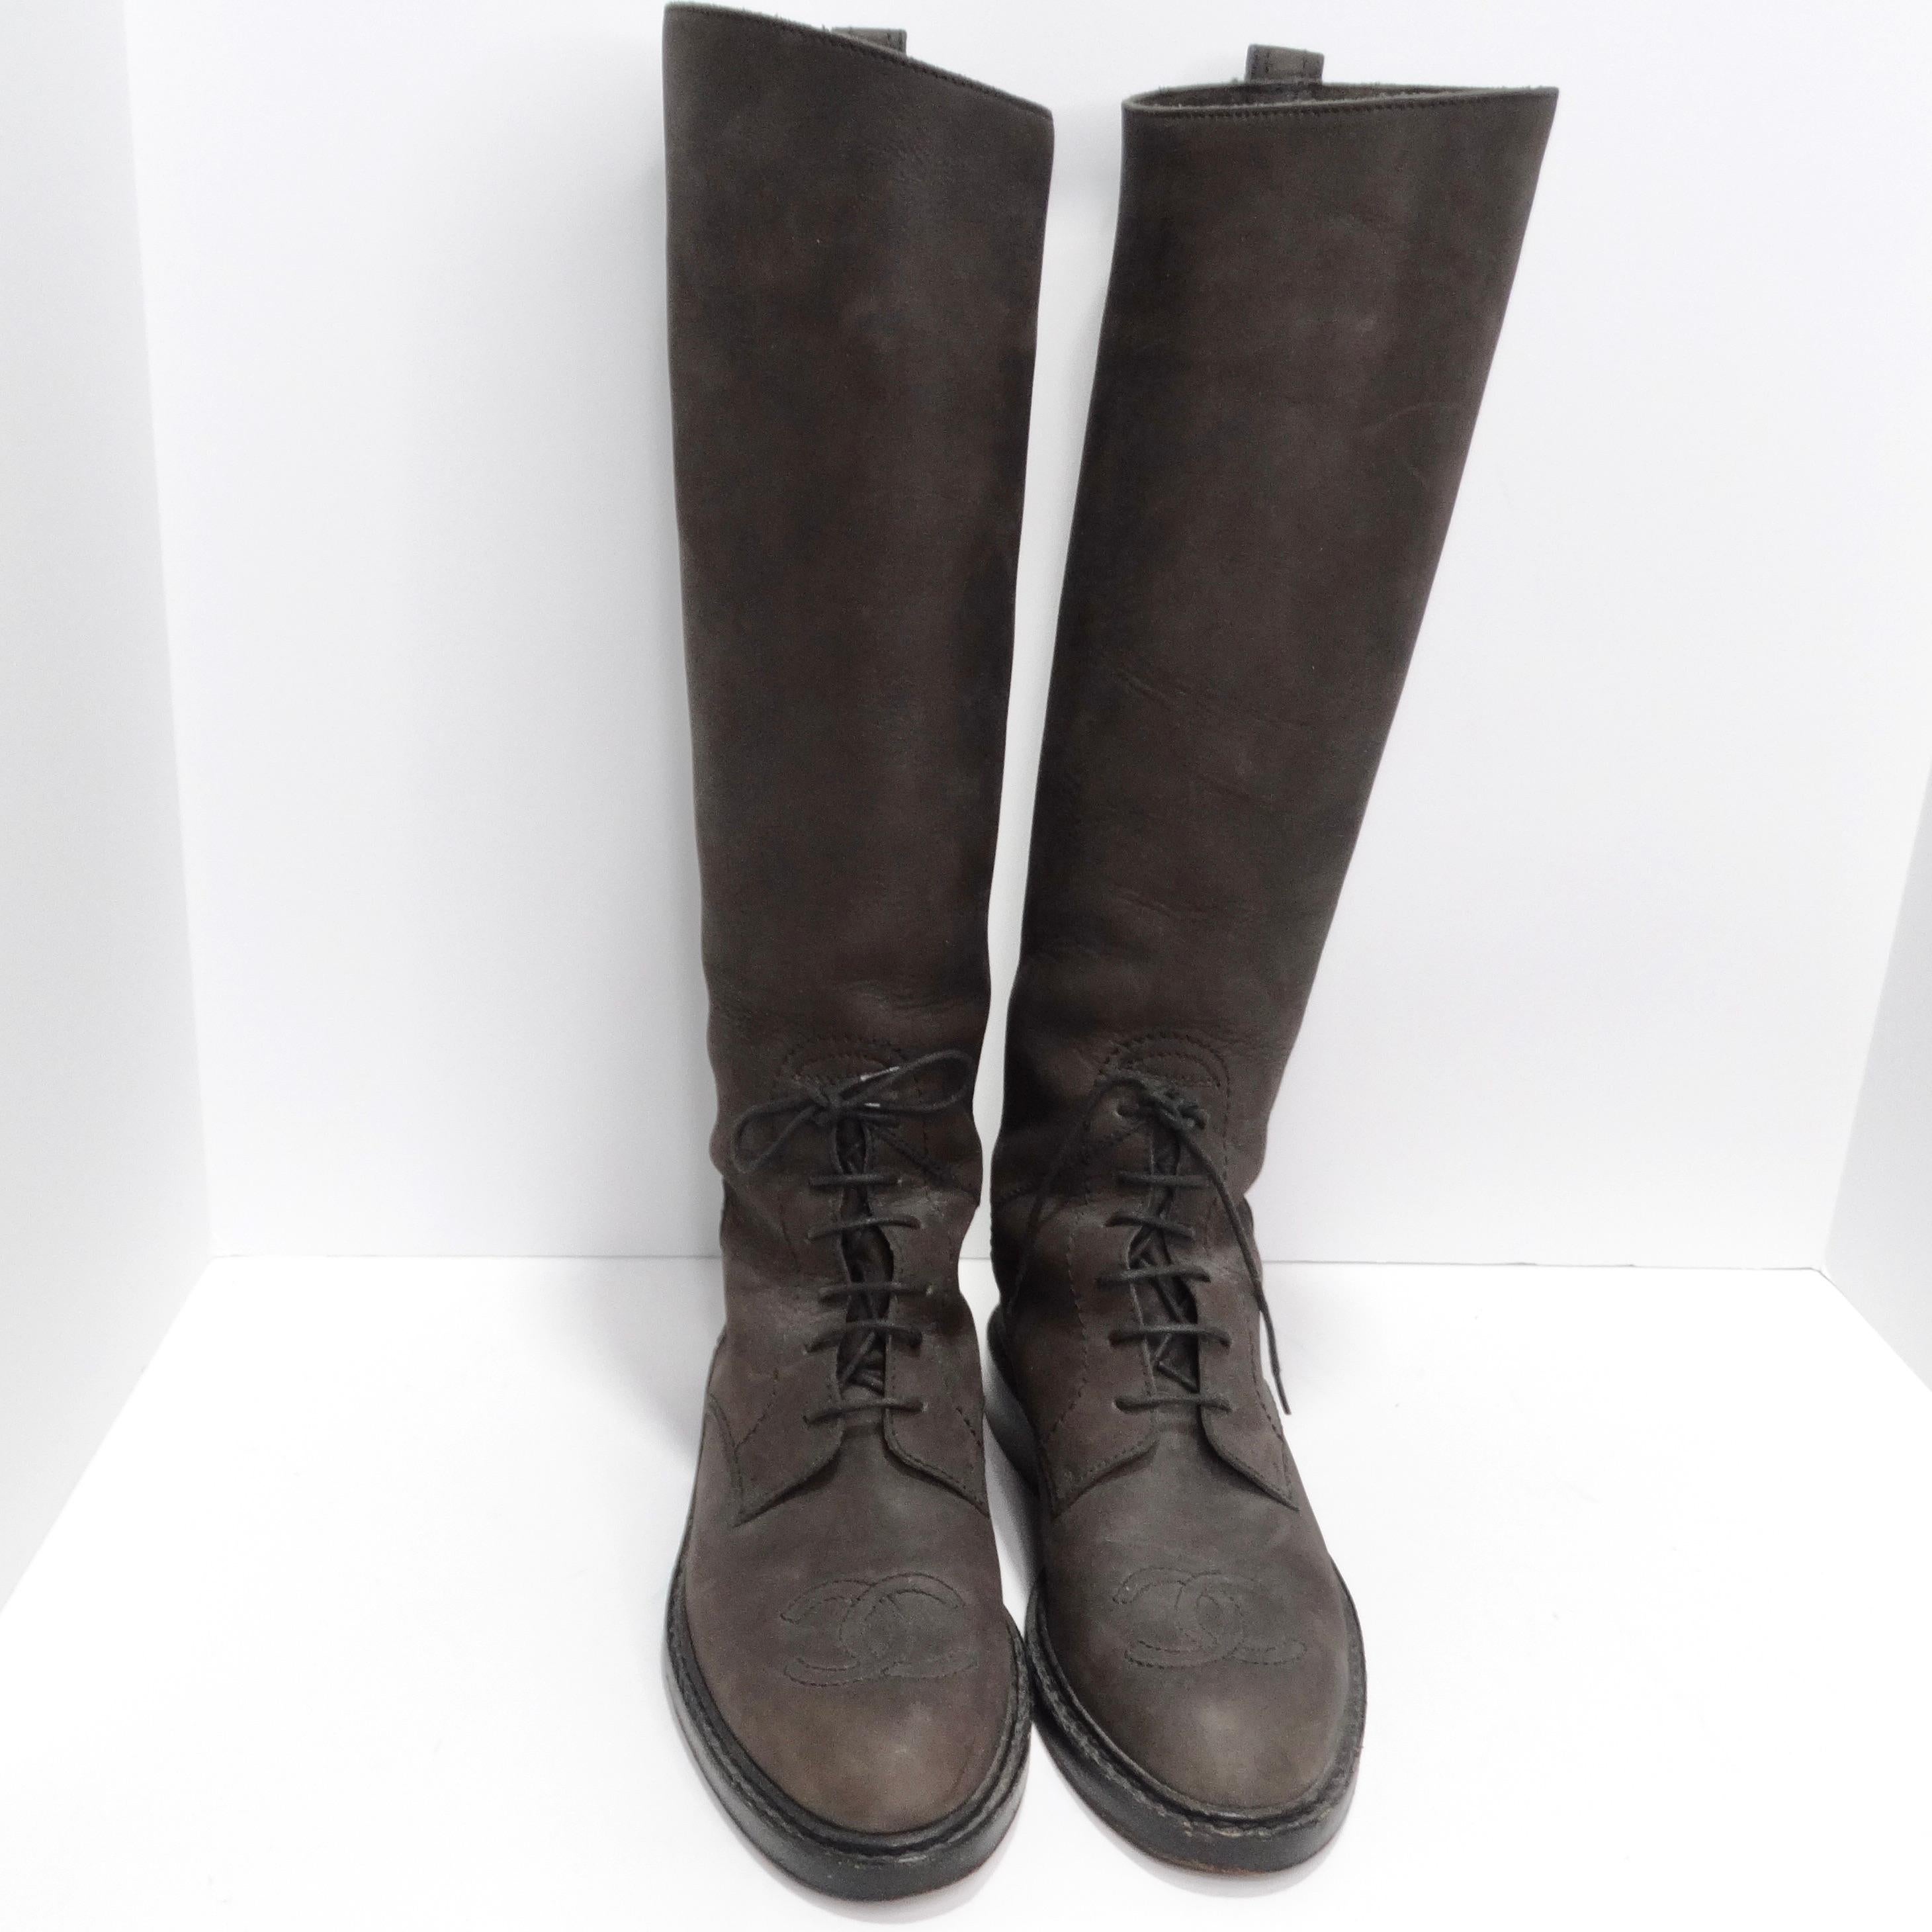 Chanel Logo Brown Leather Knee High Boots In Good Condition For Sale In Scottsdale, AZ